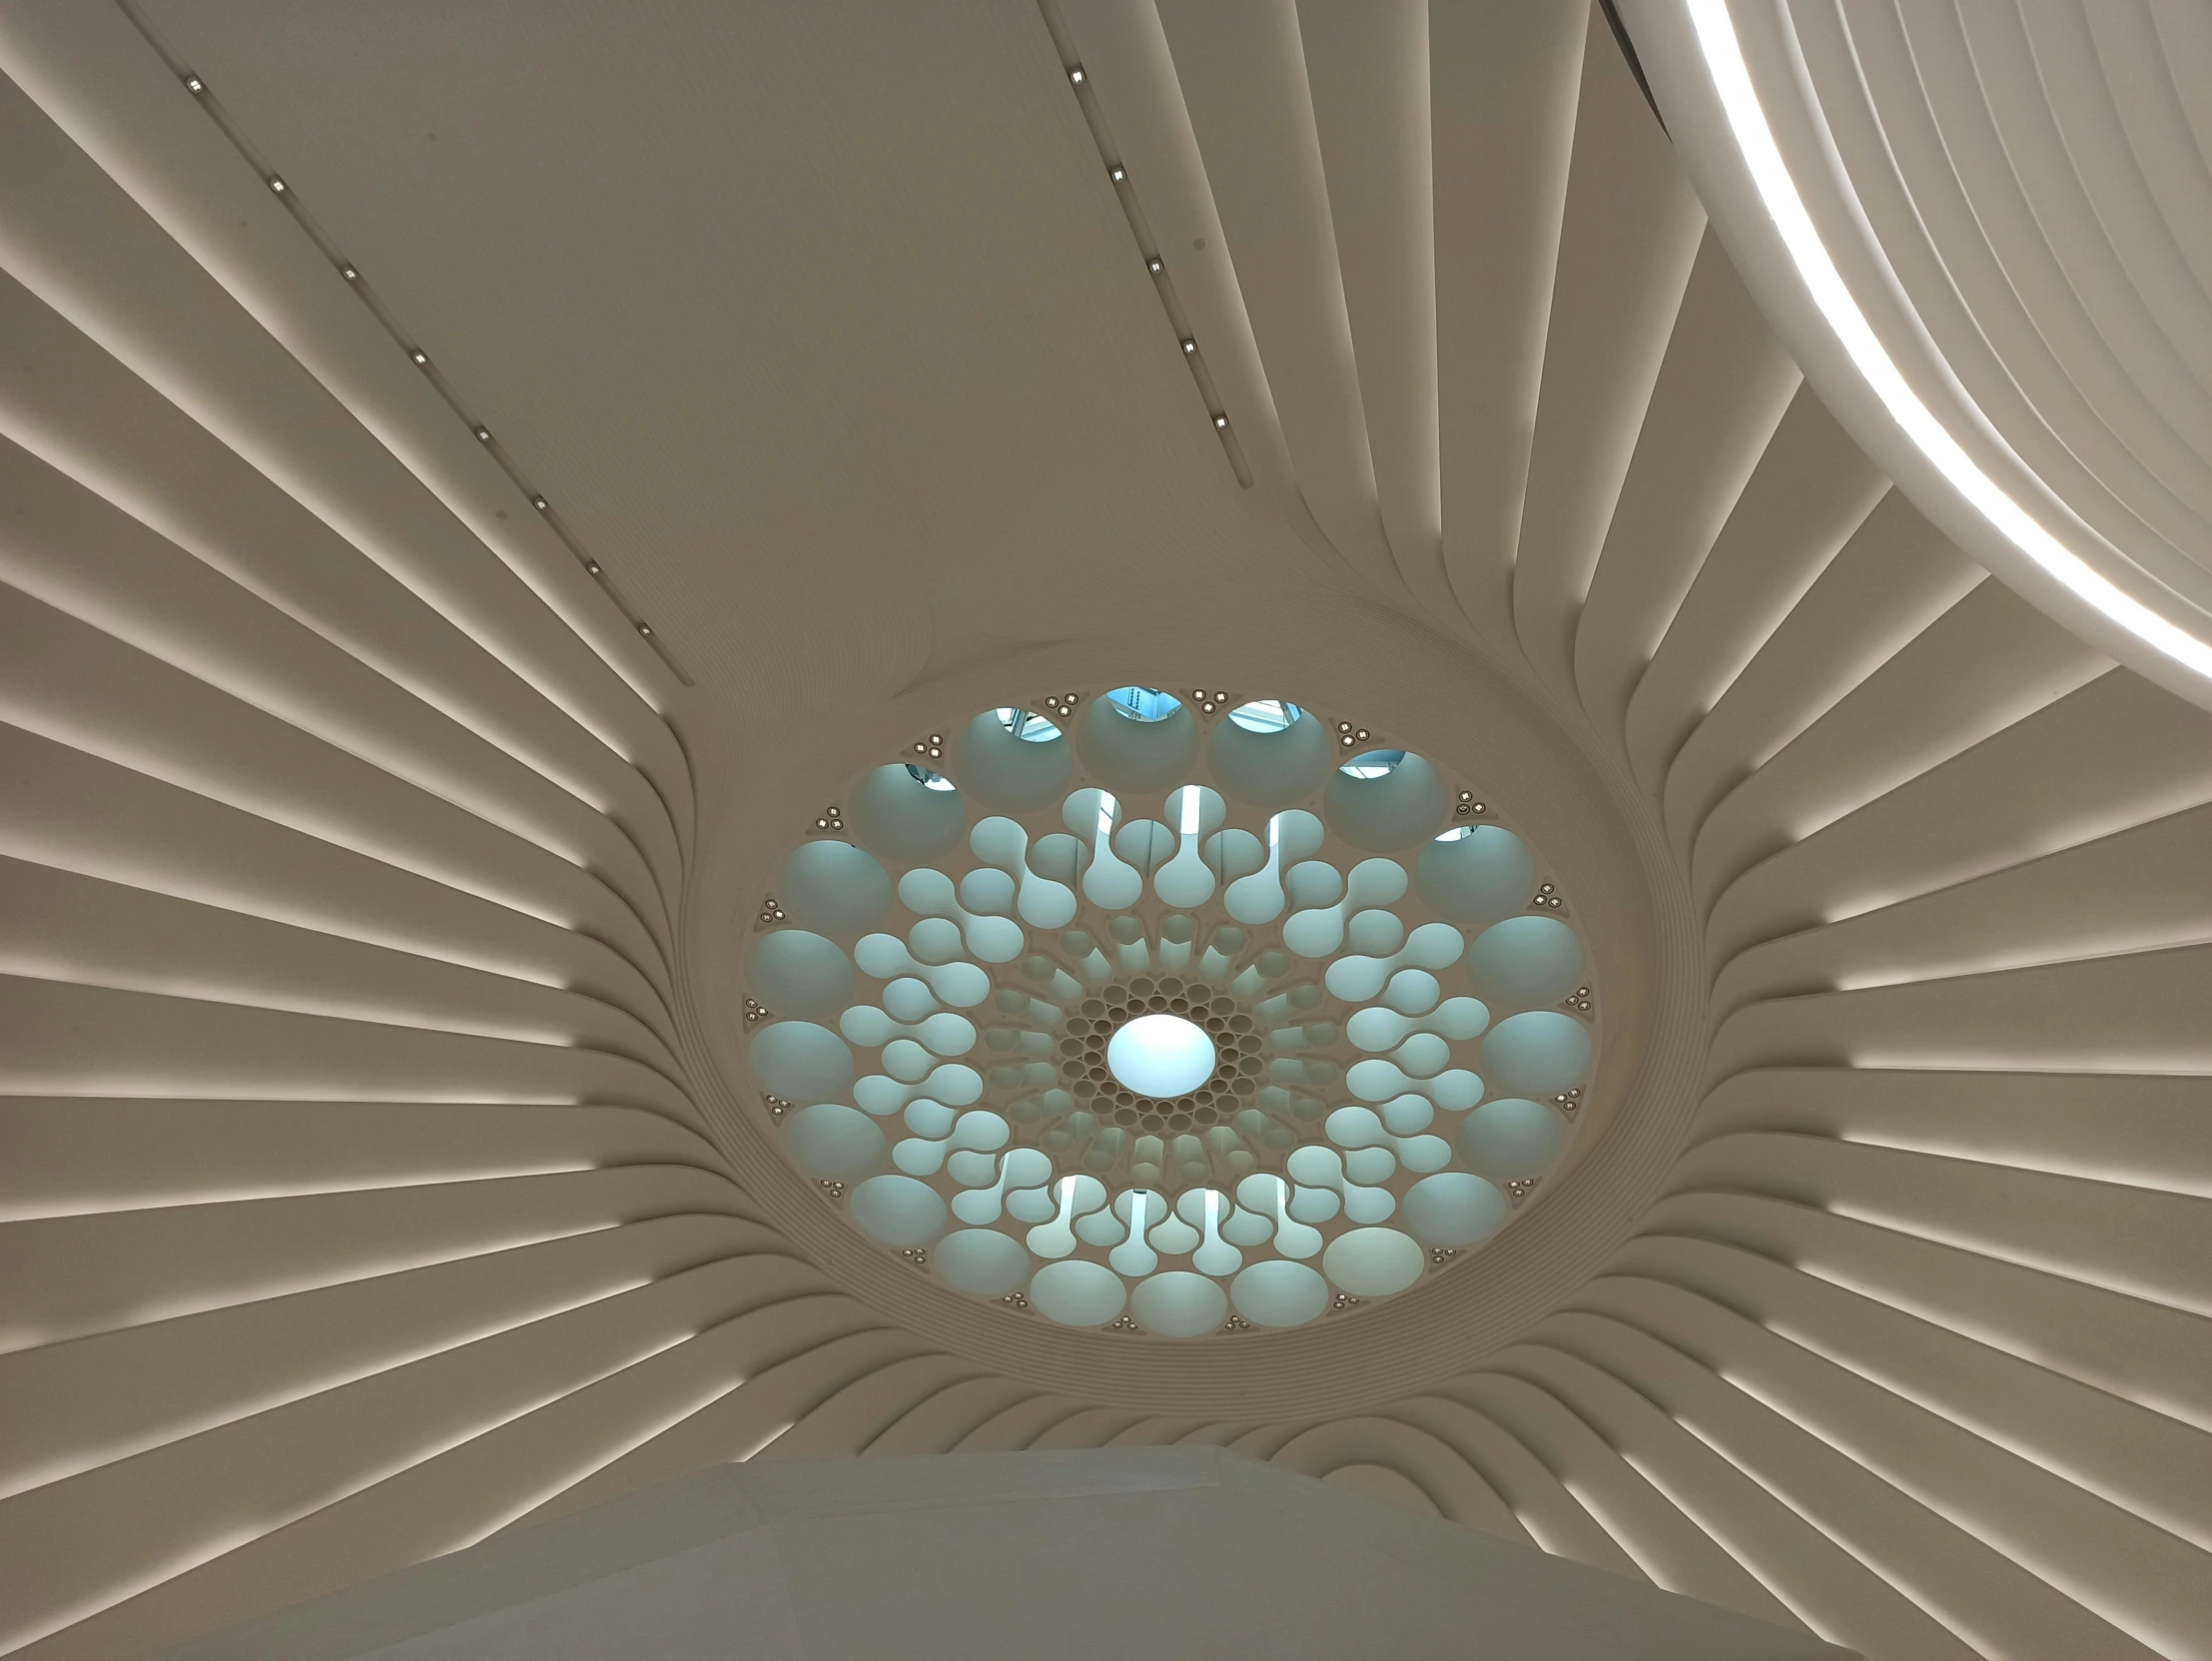 a circular window in the ceiling of a building, inspired by Zha Shibiao, paisley, jellyfish temple, white gallery, spire